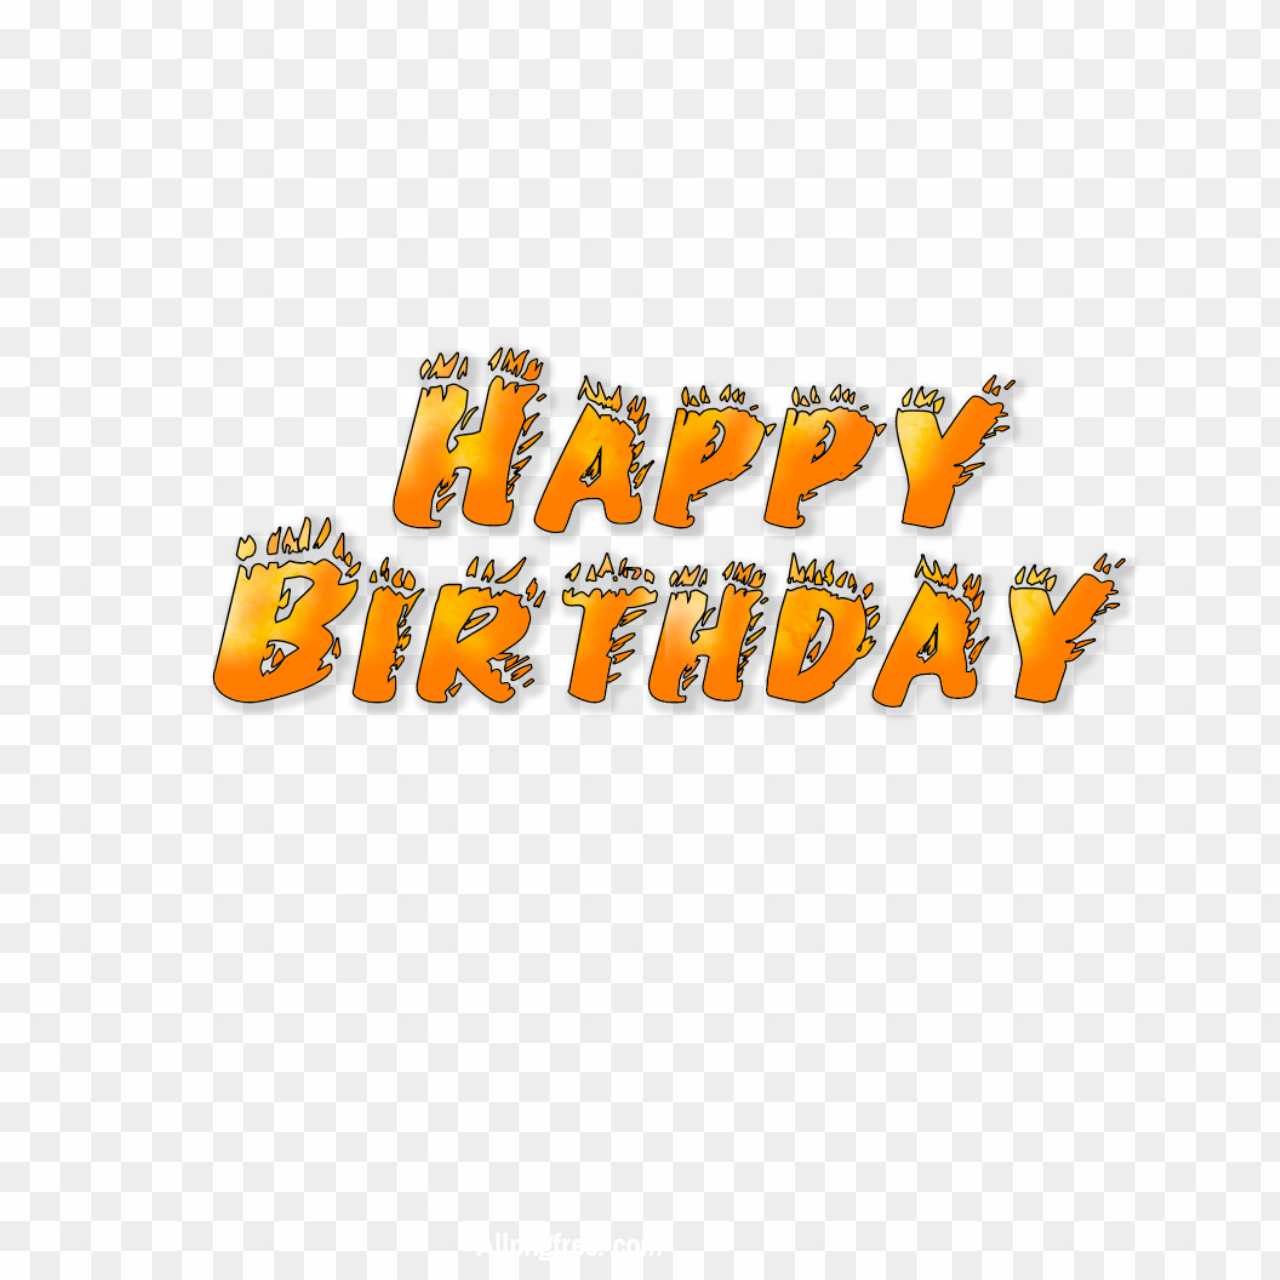 Happy birthday banner editing text PNG transparent images download